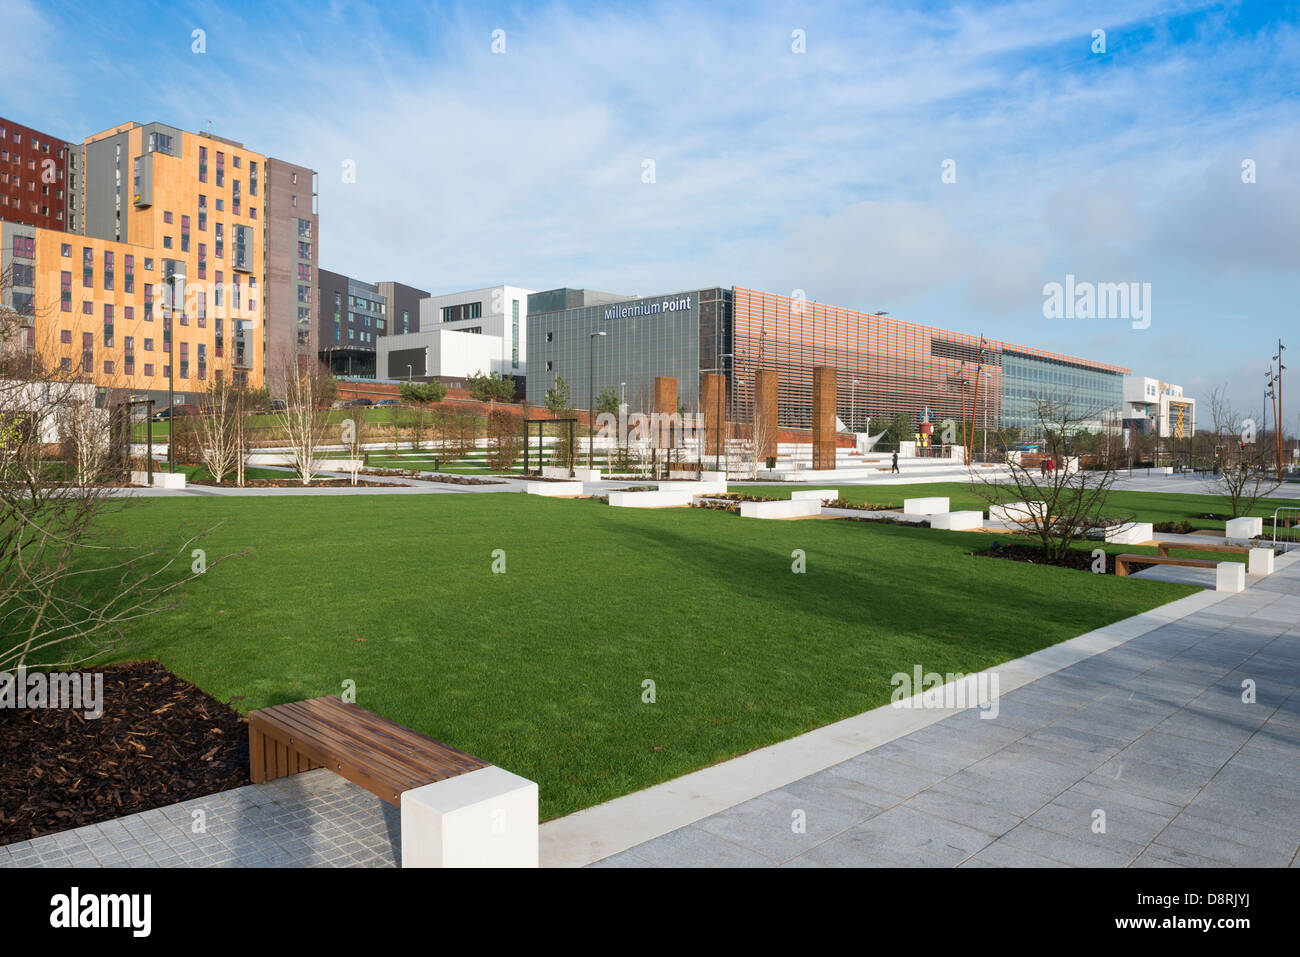 Eastside City Park is a 6.75 acre (2.73 ha) urban park located in the Eastside district of Birmingham City Centre. England, UK. Stock Photo